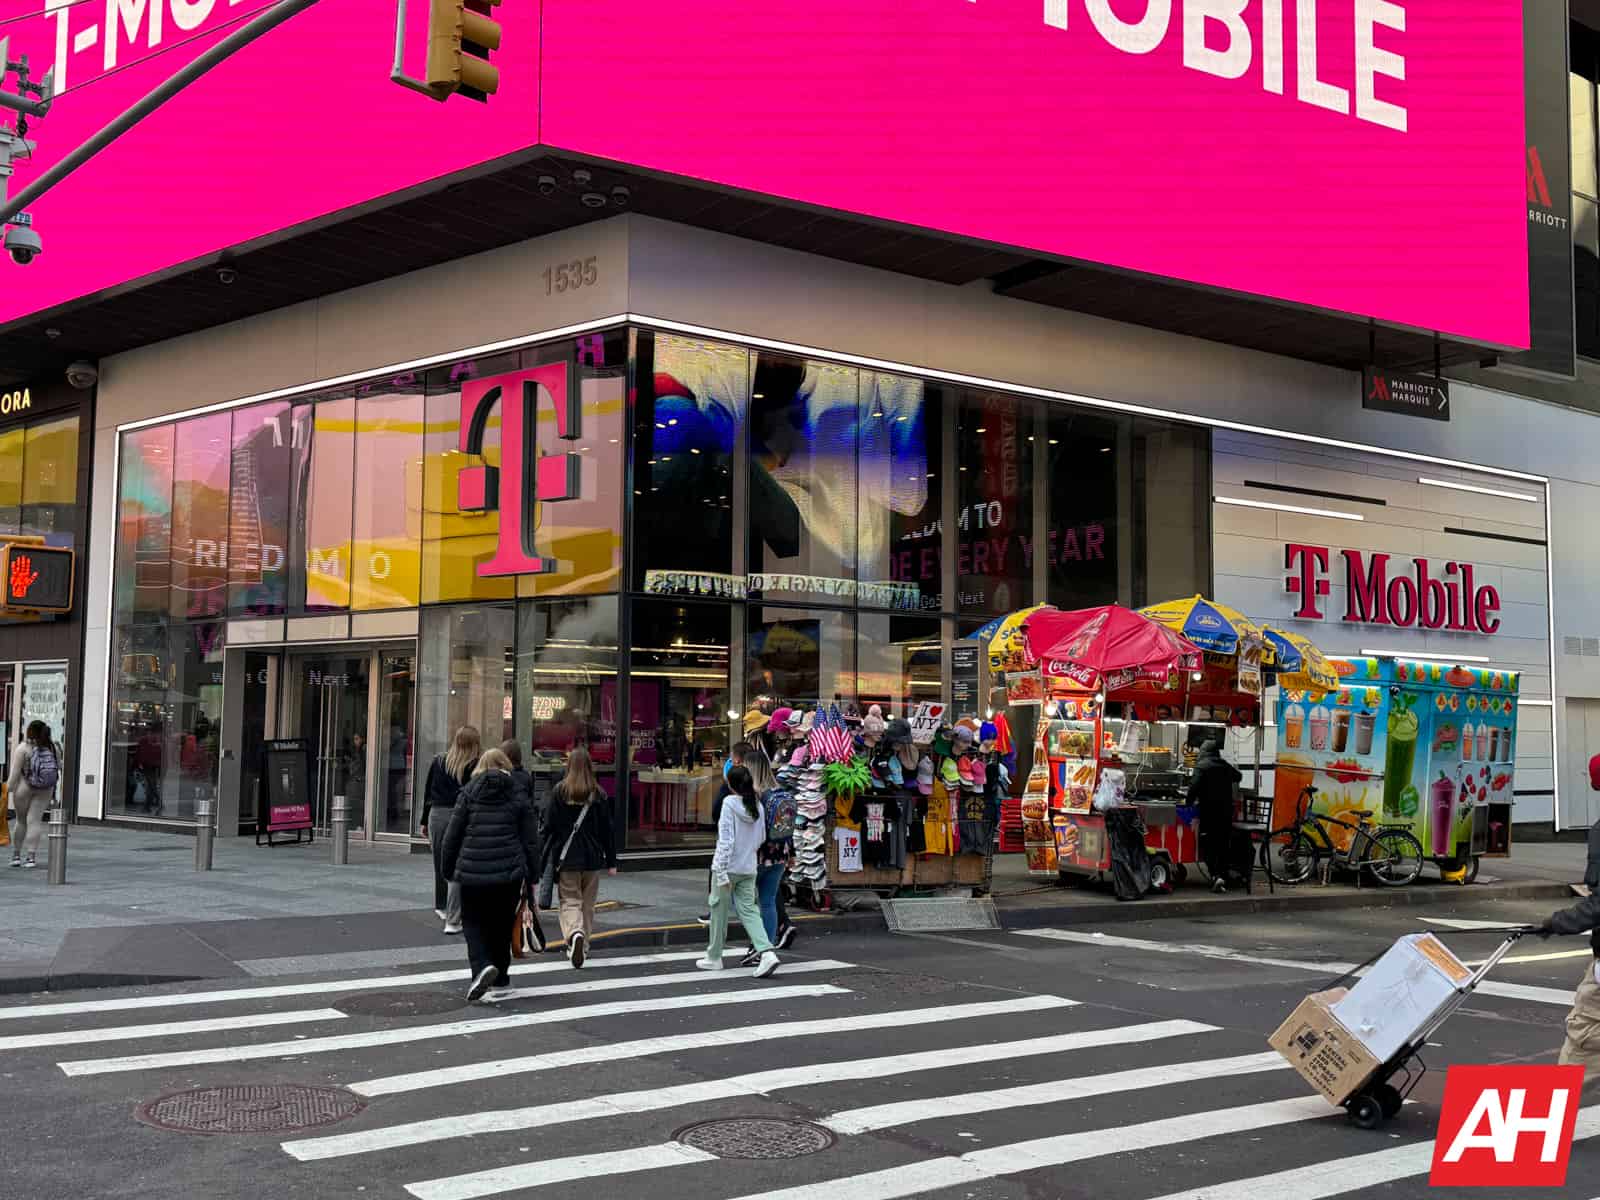 Featured image for New Scam Targeting T-Mobile Customers could Hijack your Account